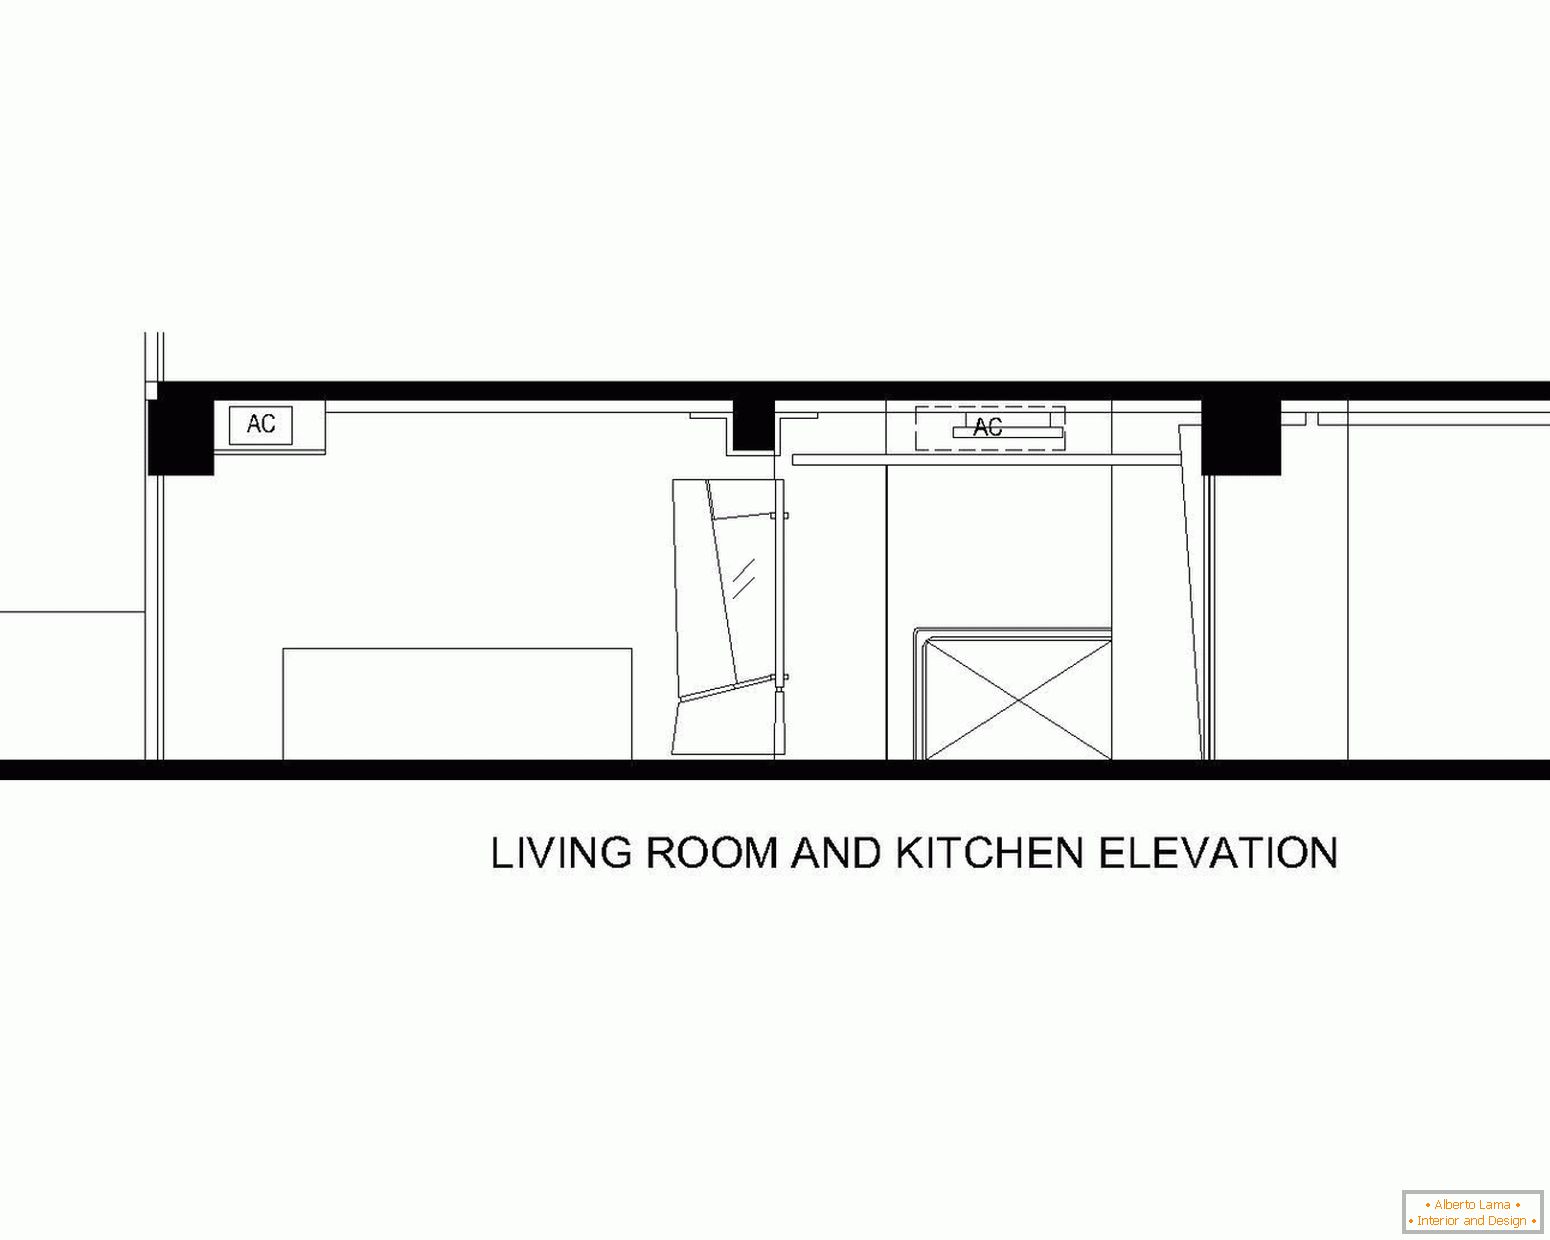 Layout of the living room and kitchen